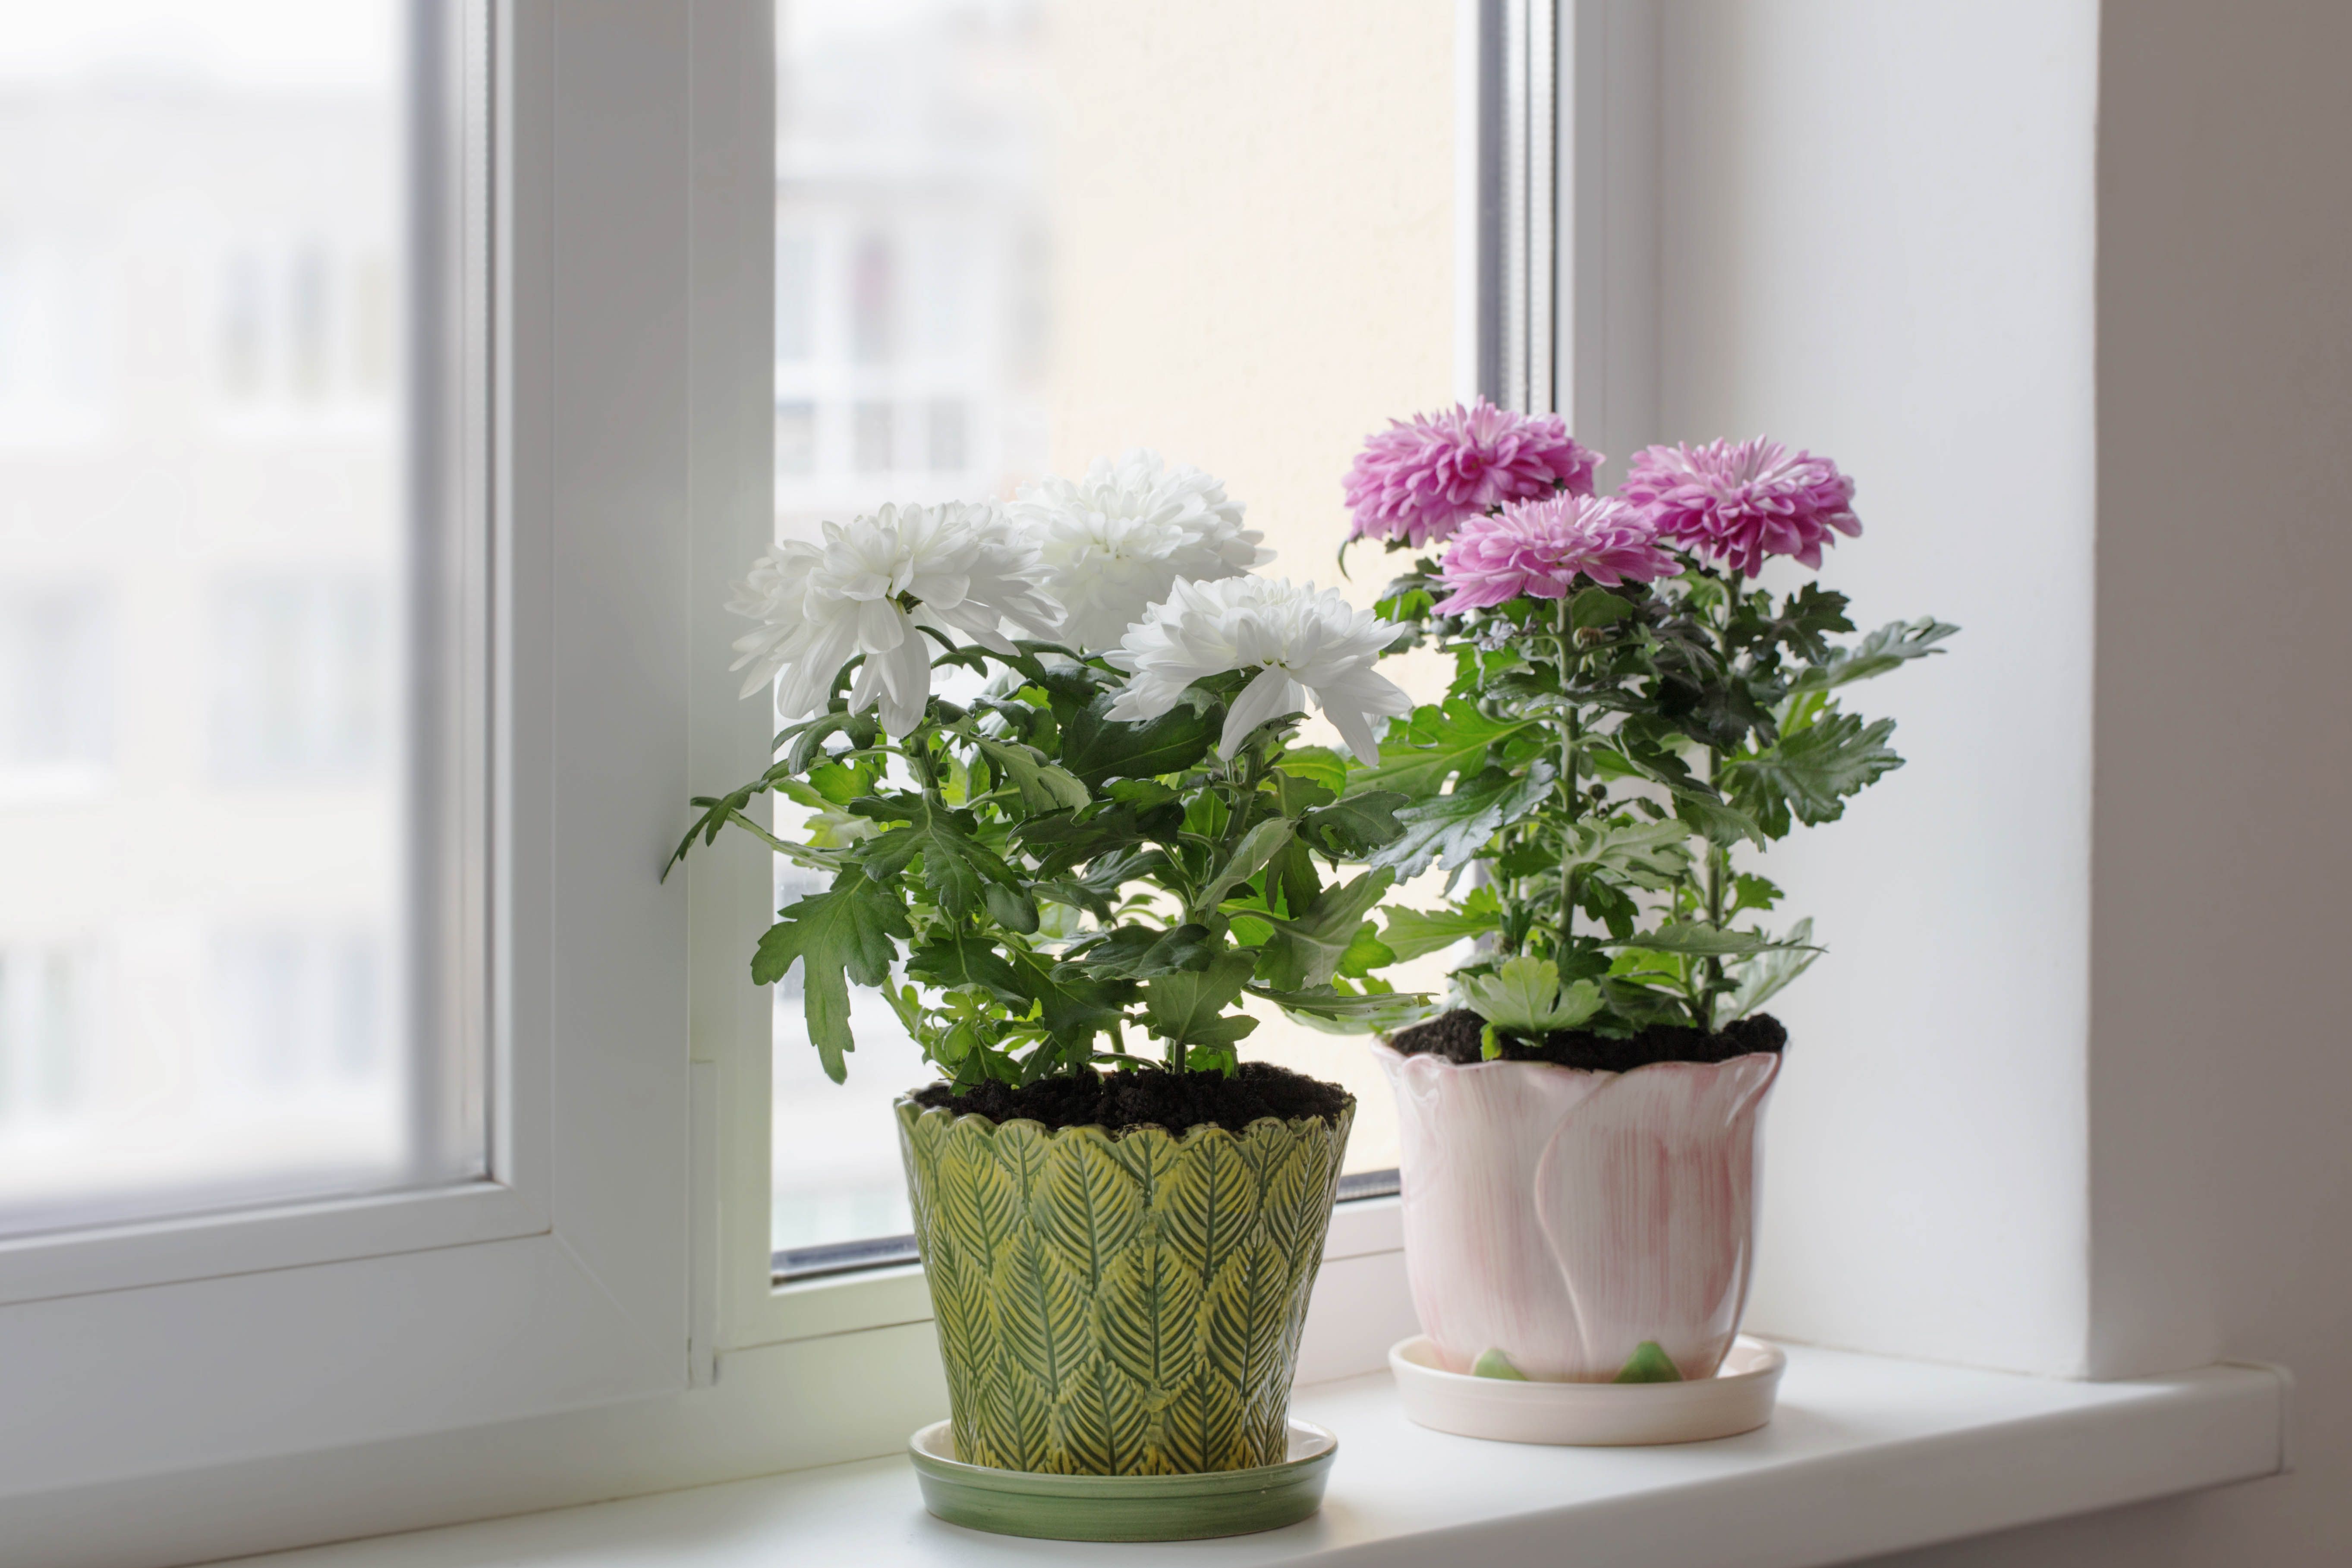 plants that keep bugs away-chrysanthemums-potted plants-window sill